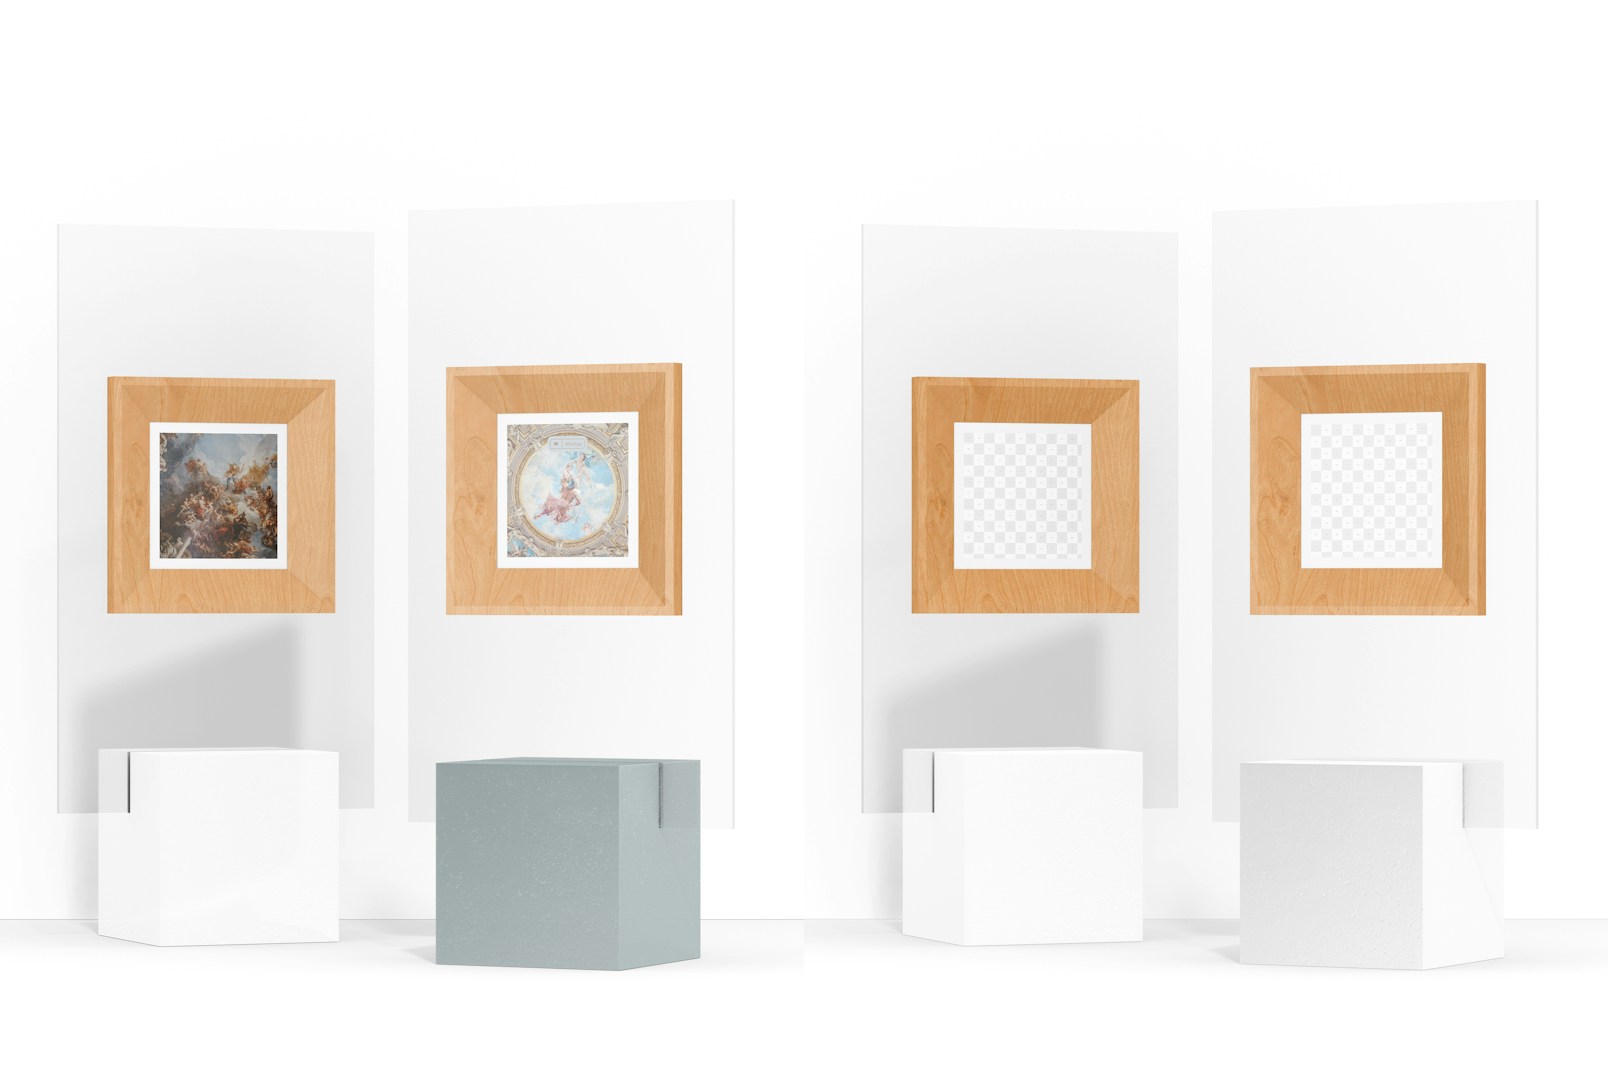 Exhibition Frames on Acrylic Stand Mockup, Perspective